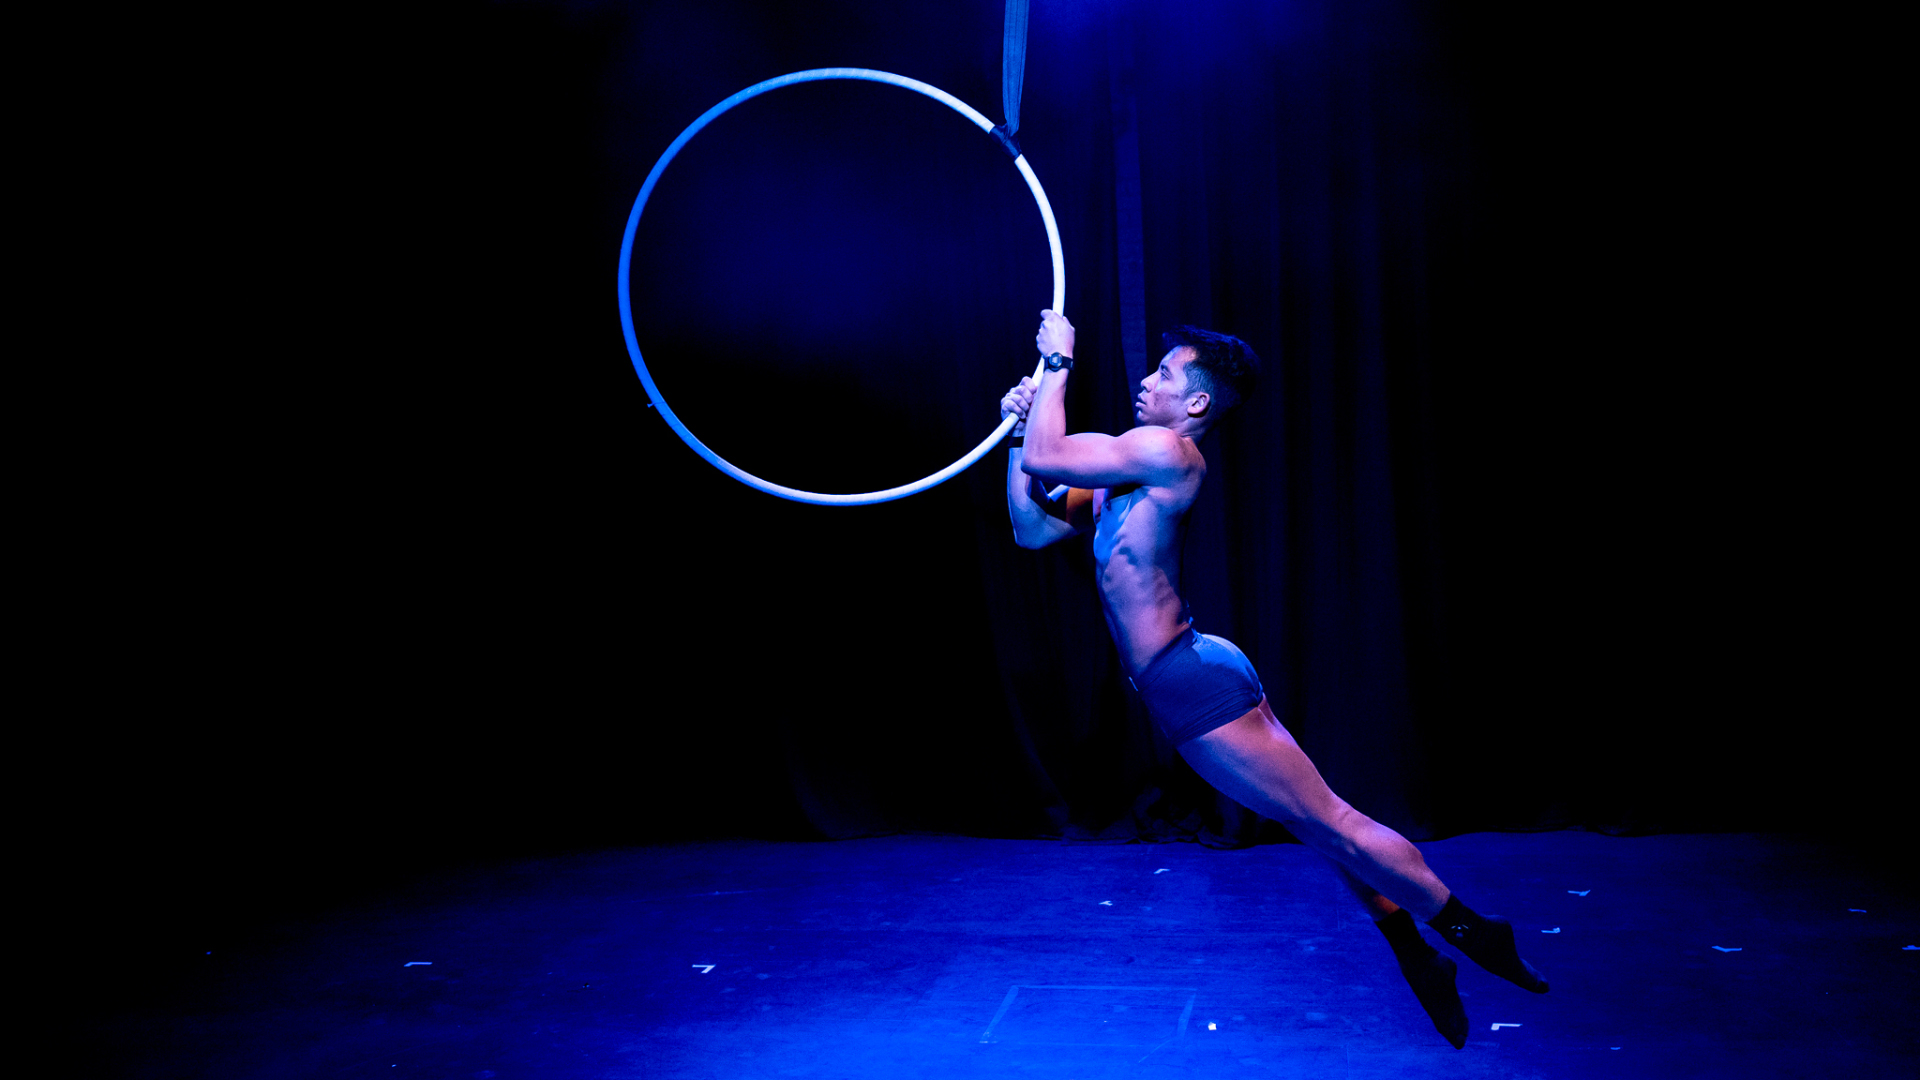 A person hangs from an aerial hoop.